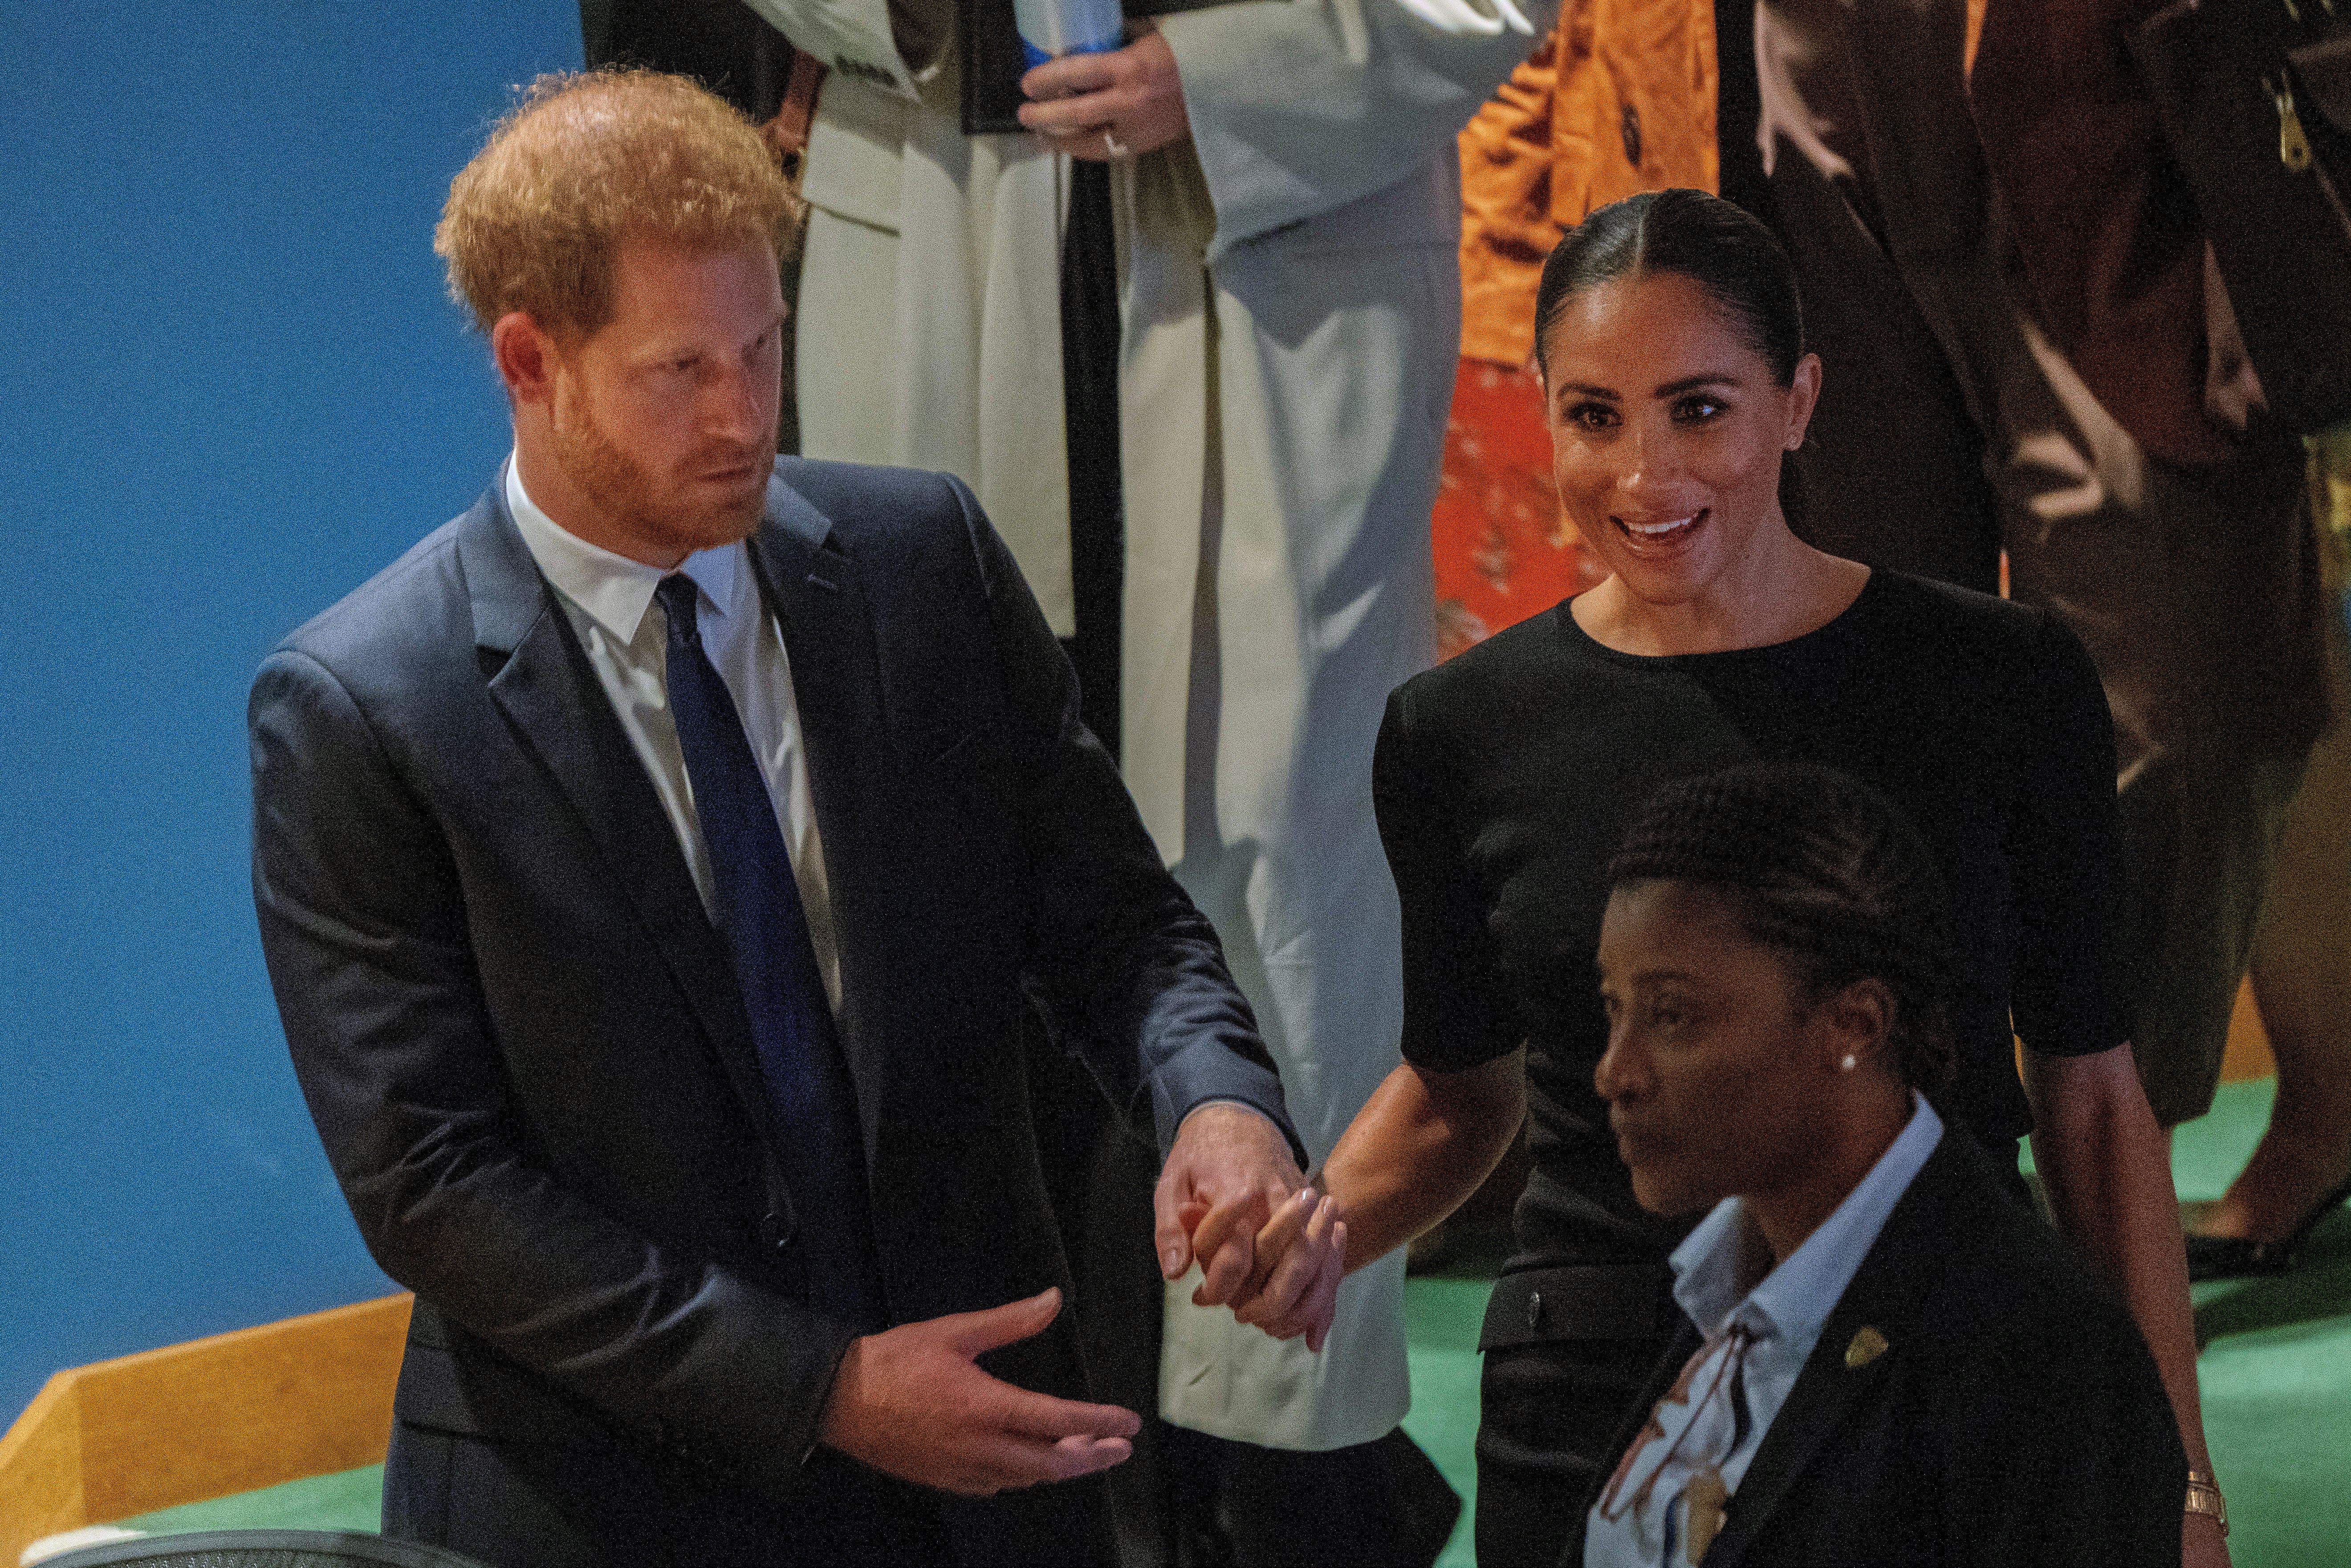 Prince Harry, Duke of Sussex and Meghan, Duchess of Sussex arrive at the United Nations General Assembly on Nelson Mandela International Day. July 18, 2022 in New York City. | Source: Getty Images 